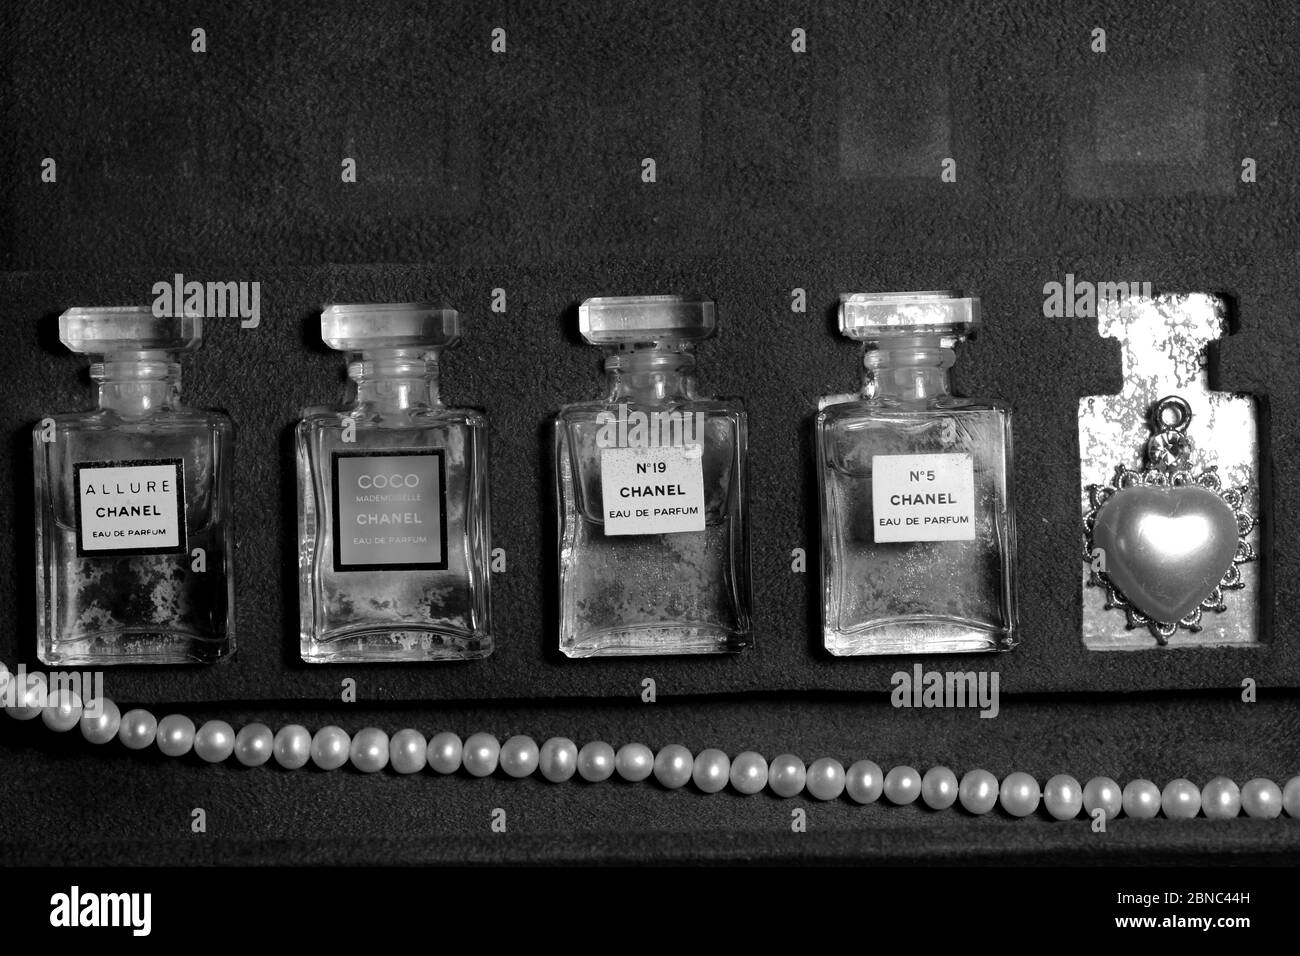 Paris, France on 13th May in 2020 : Chanel perfume bottles